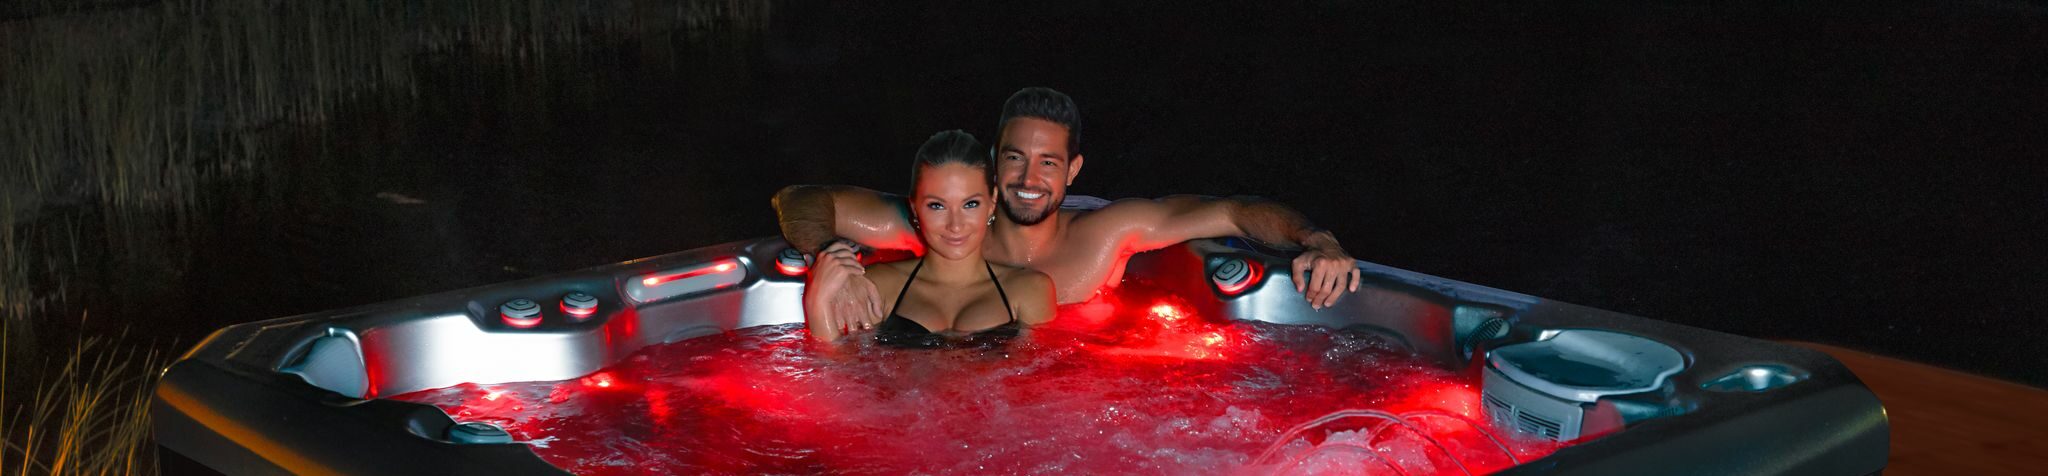 3 Ways to Spice Up Your Hot Tub Date Night